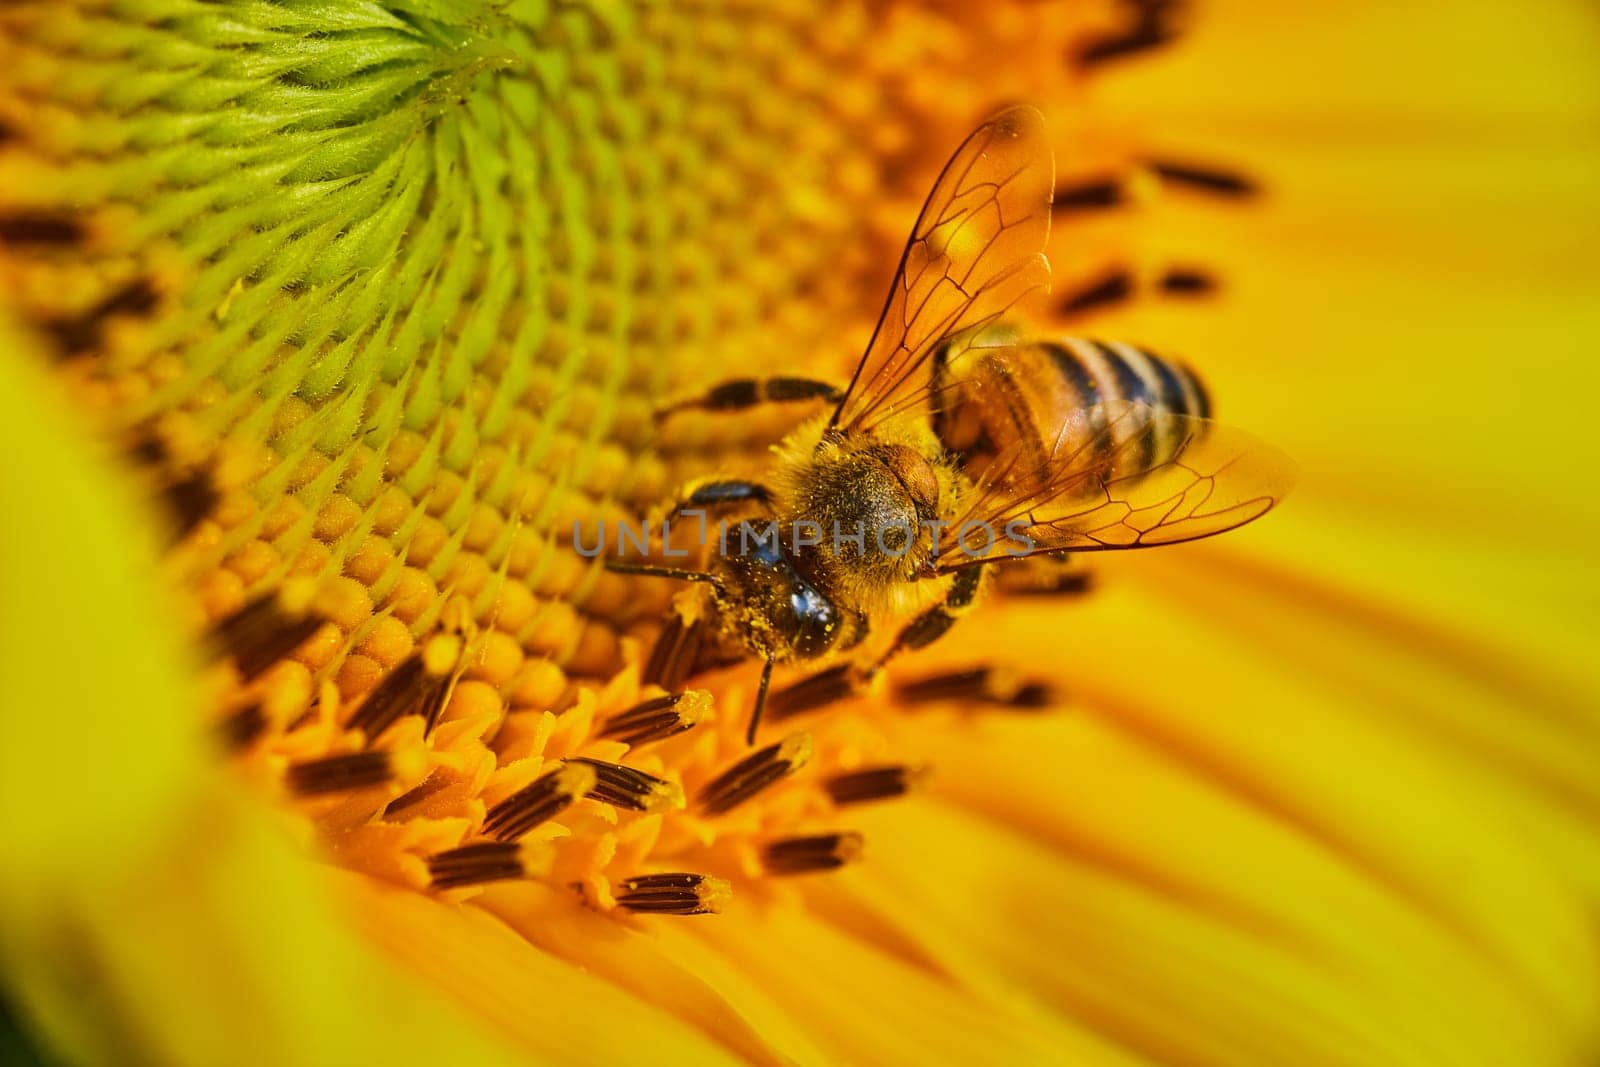 Image of Macro of bee with pollen on it as it pollinates interior of yellow flower